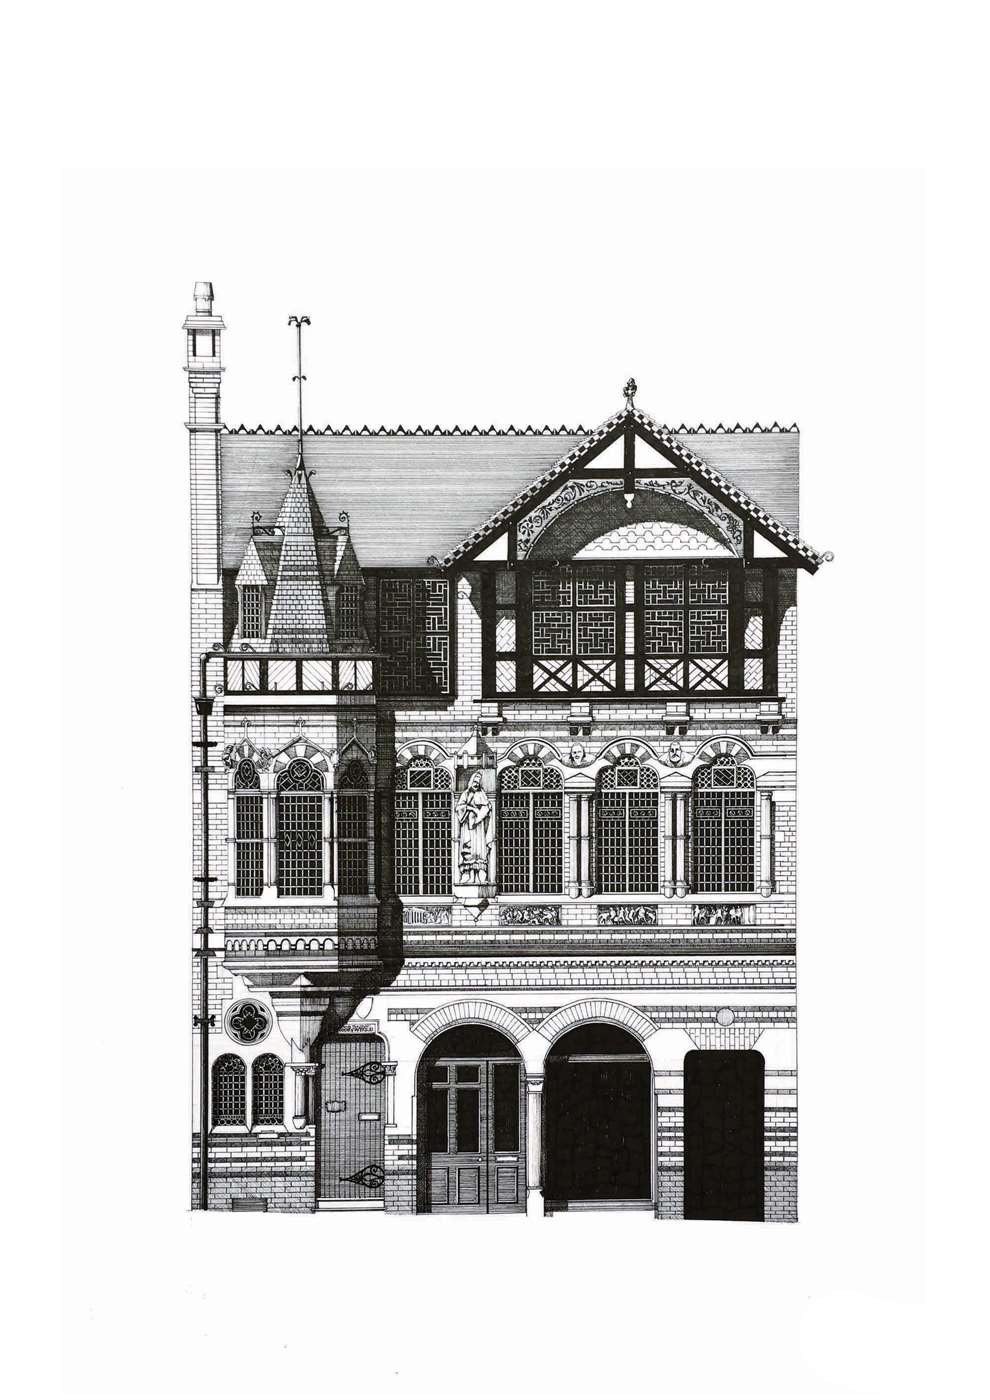 Nick Coupland, Intricate detailed historic architecture illustration of the Watson Fothergill building. Pen and ink, striking, bold images. 